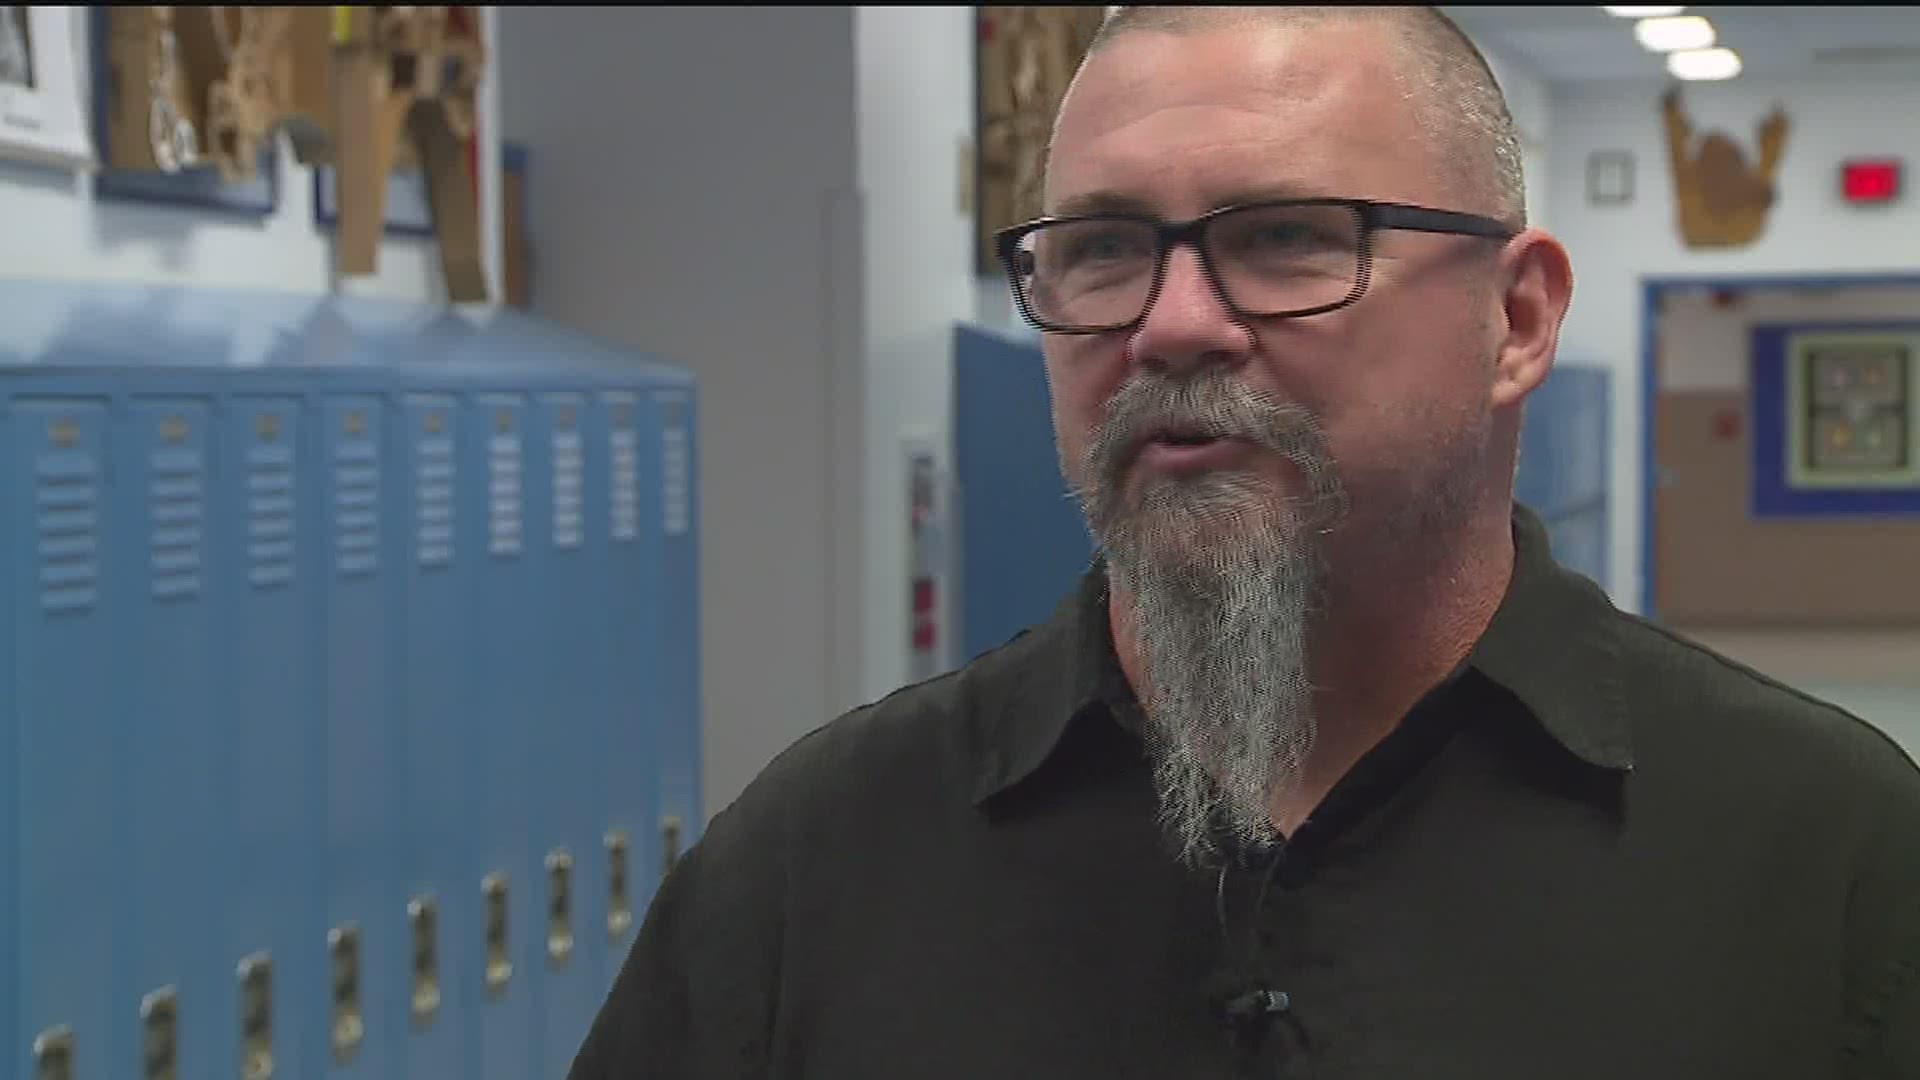 Geneseo Middle School teacher Mr. Eaker uses rock and roll music to connect with kids.